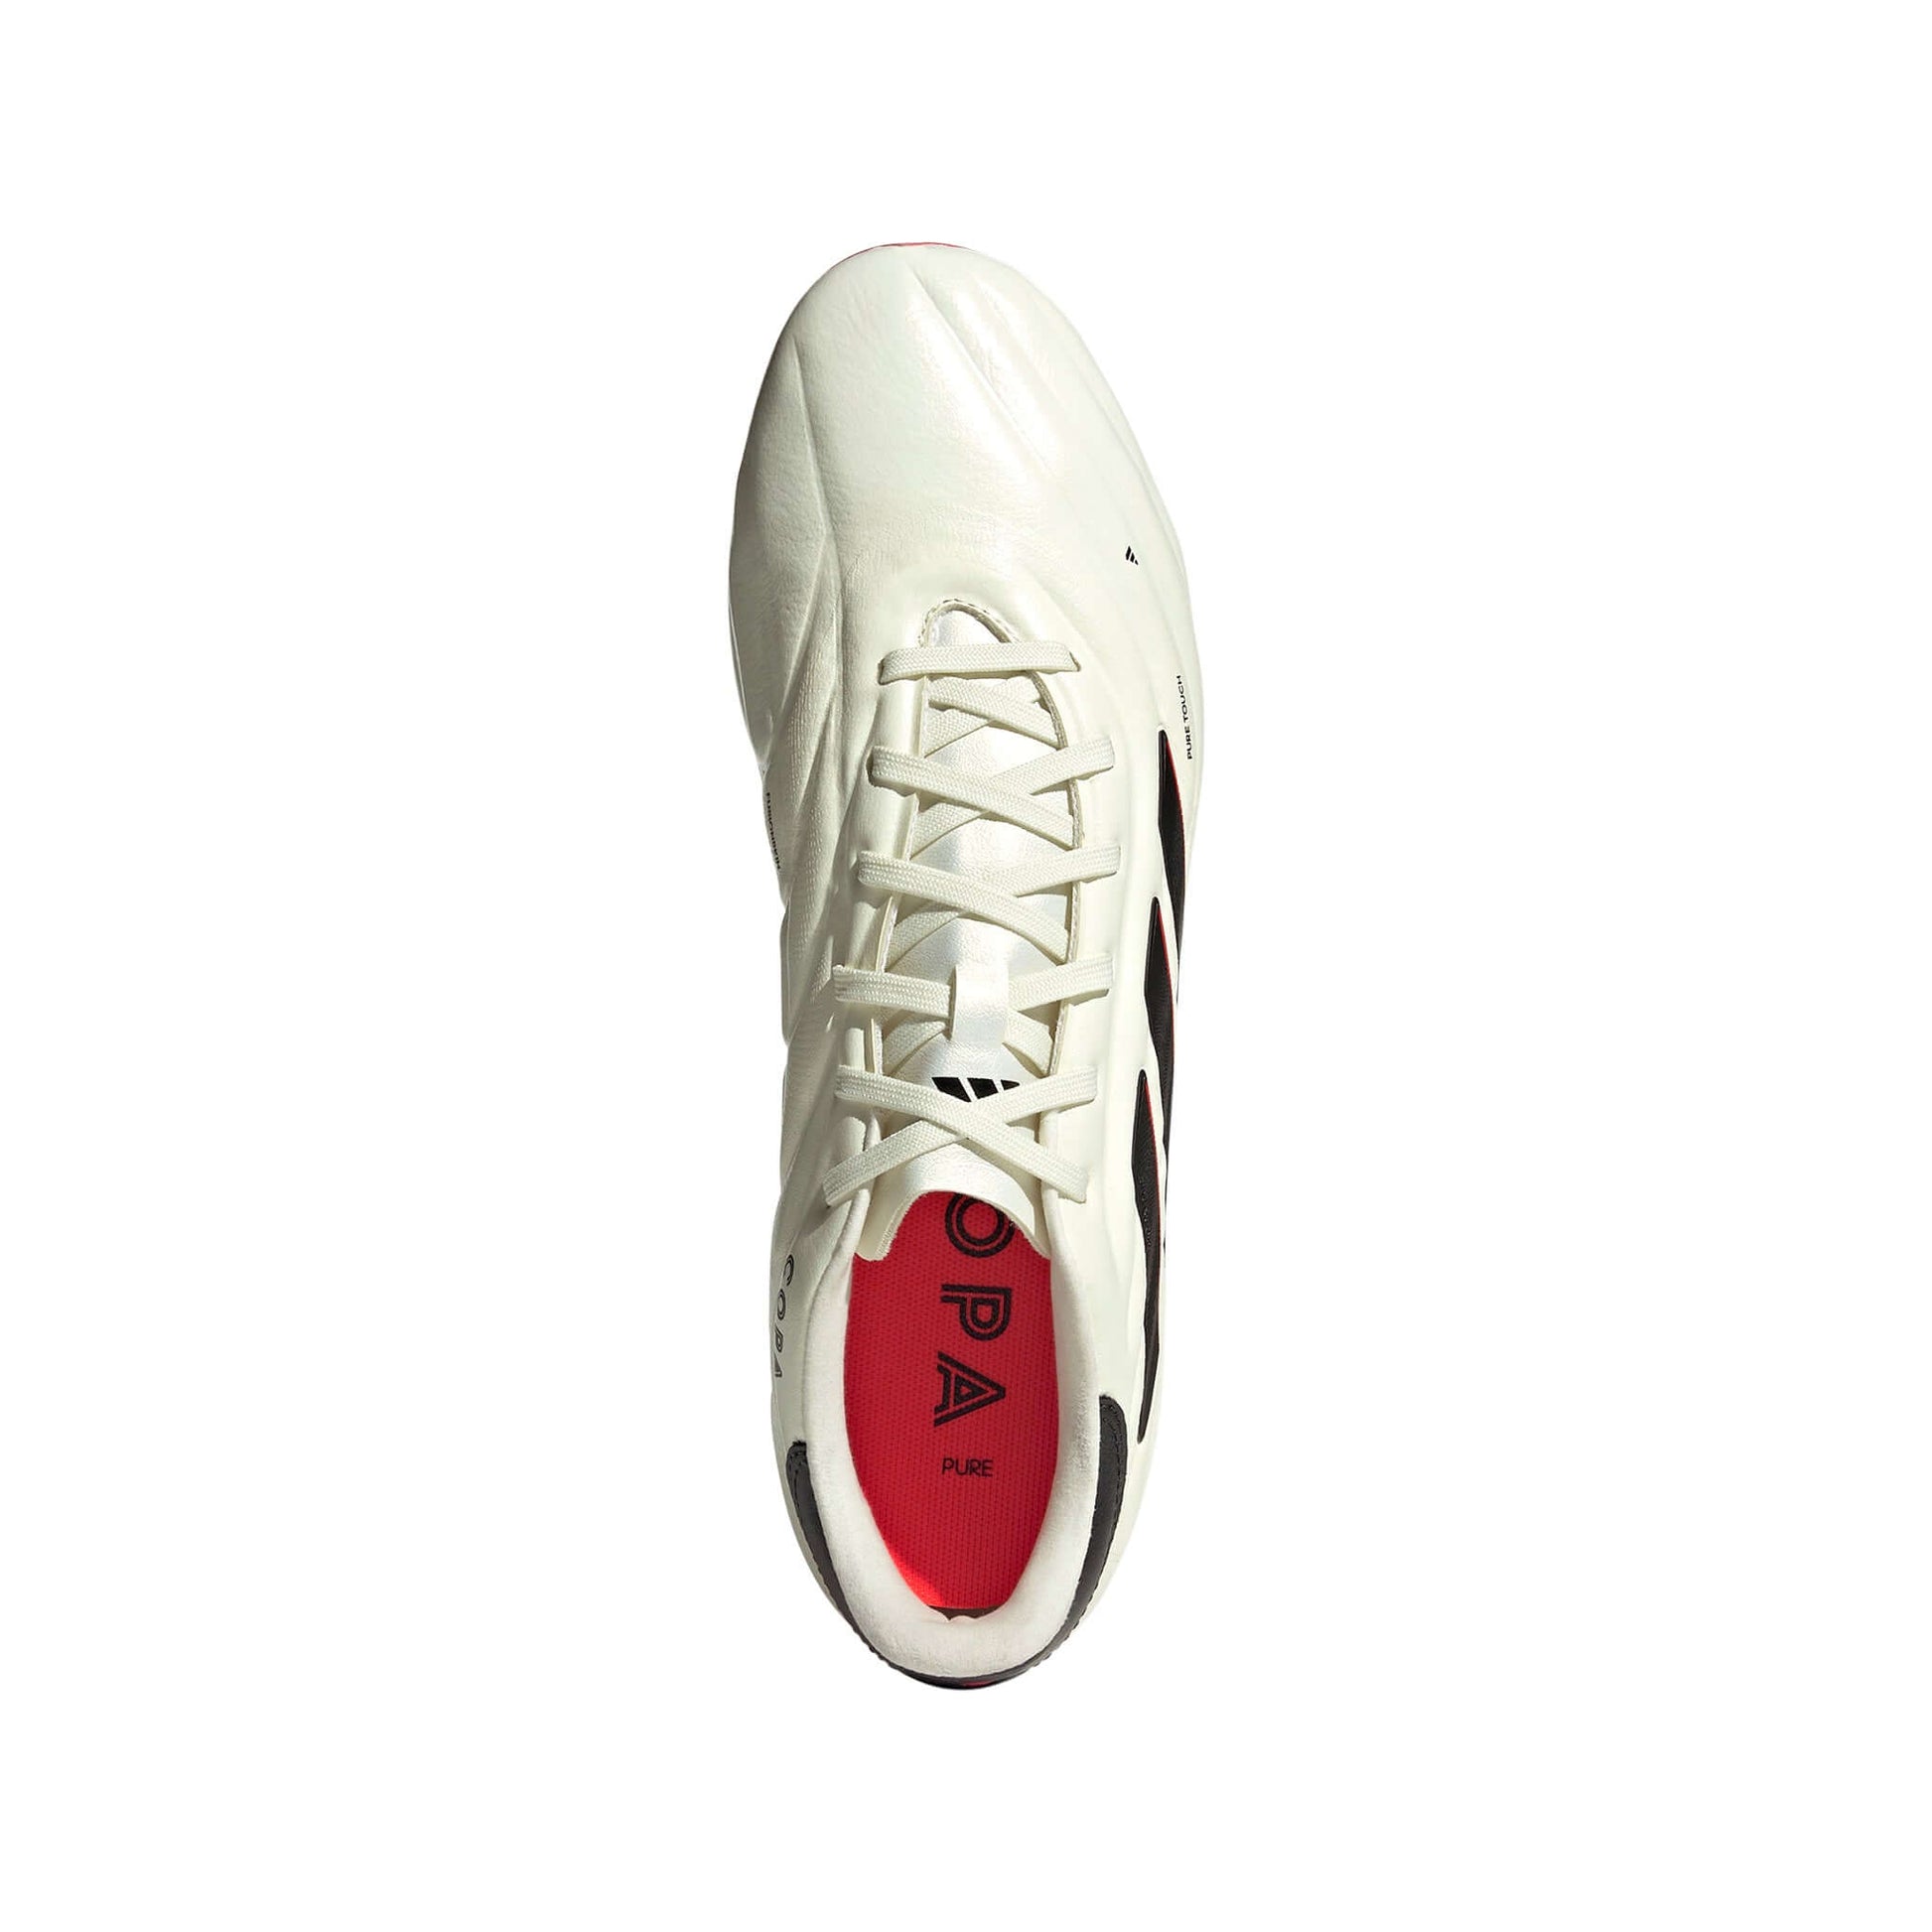 Copa Pure II Pro Firm Ground Cleats | EvangelistaSports.com | Canada's Premiere Soccer Store